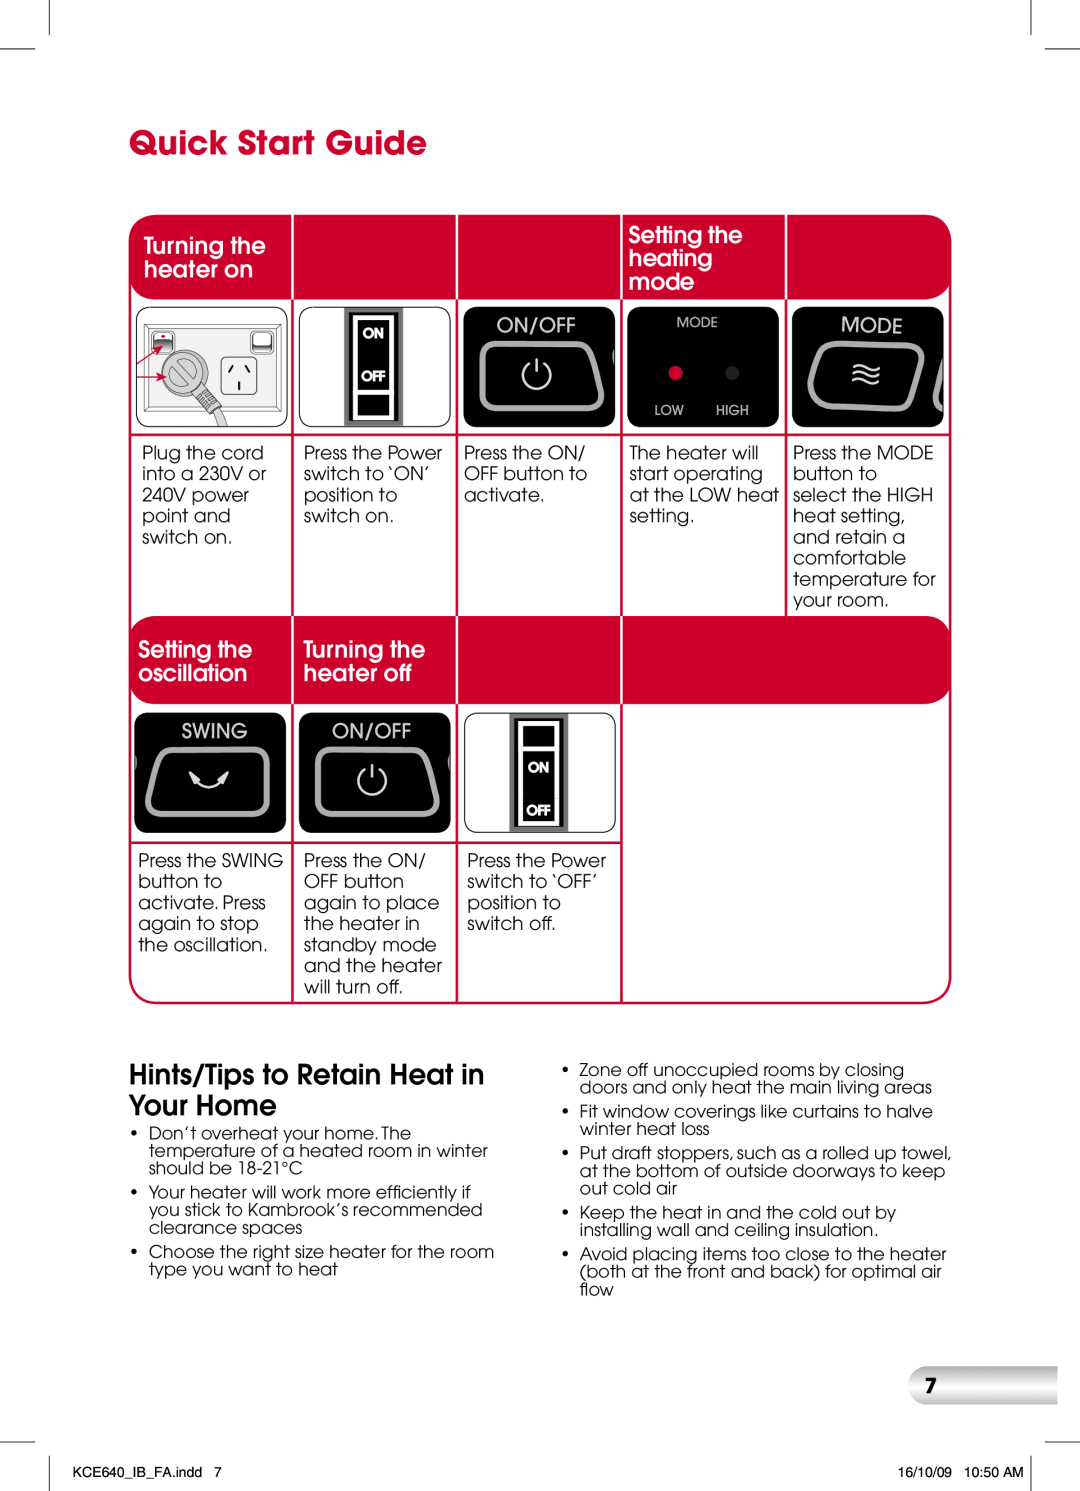 Kambrook KCE640 manual Quick Start Guide, Turning the heater on, Setting the heating mode, oscillation, heater off 